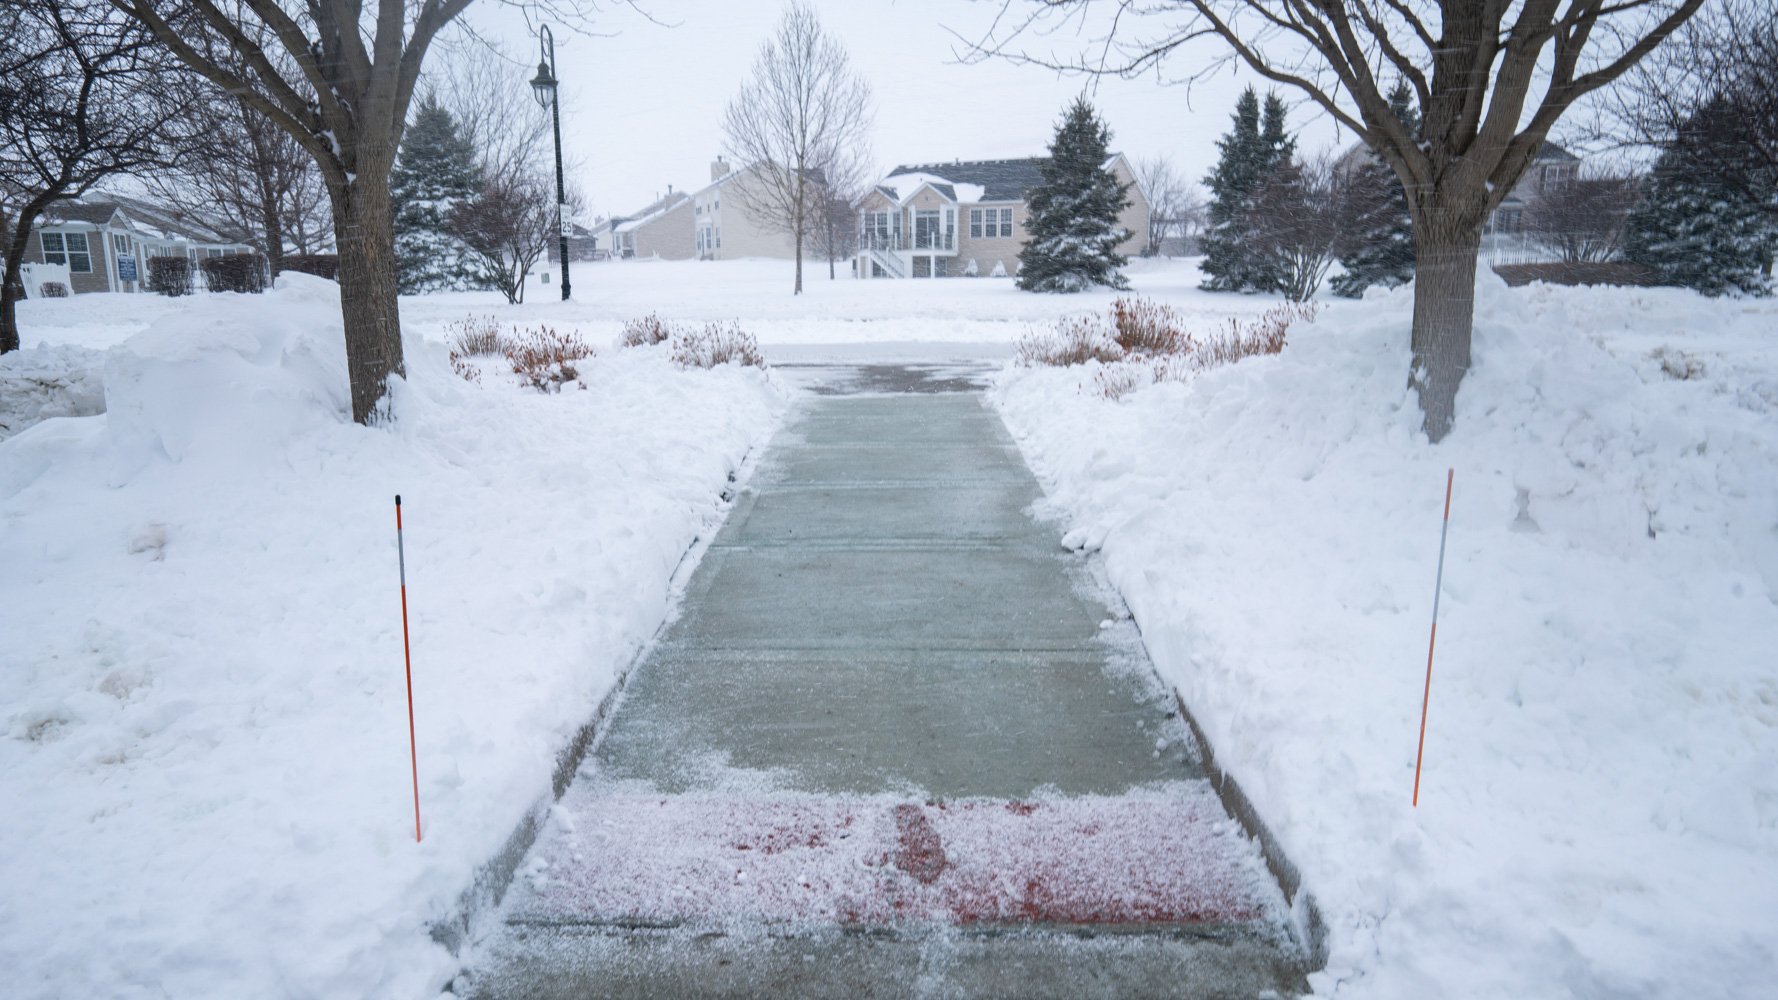 cleared sidewalk at an HOA with snow stakes marking edges of the walkway in the snow